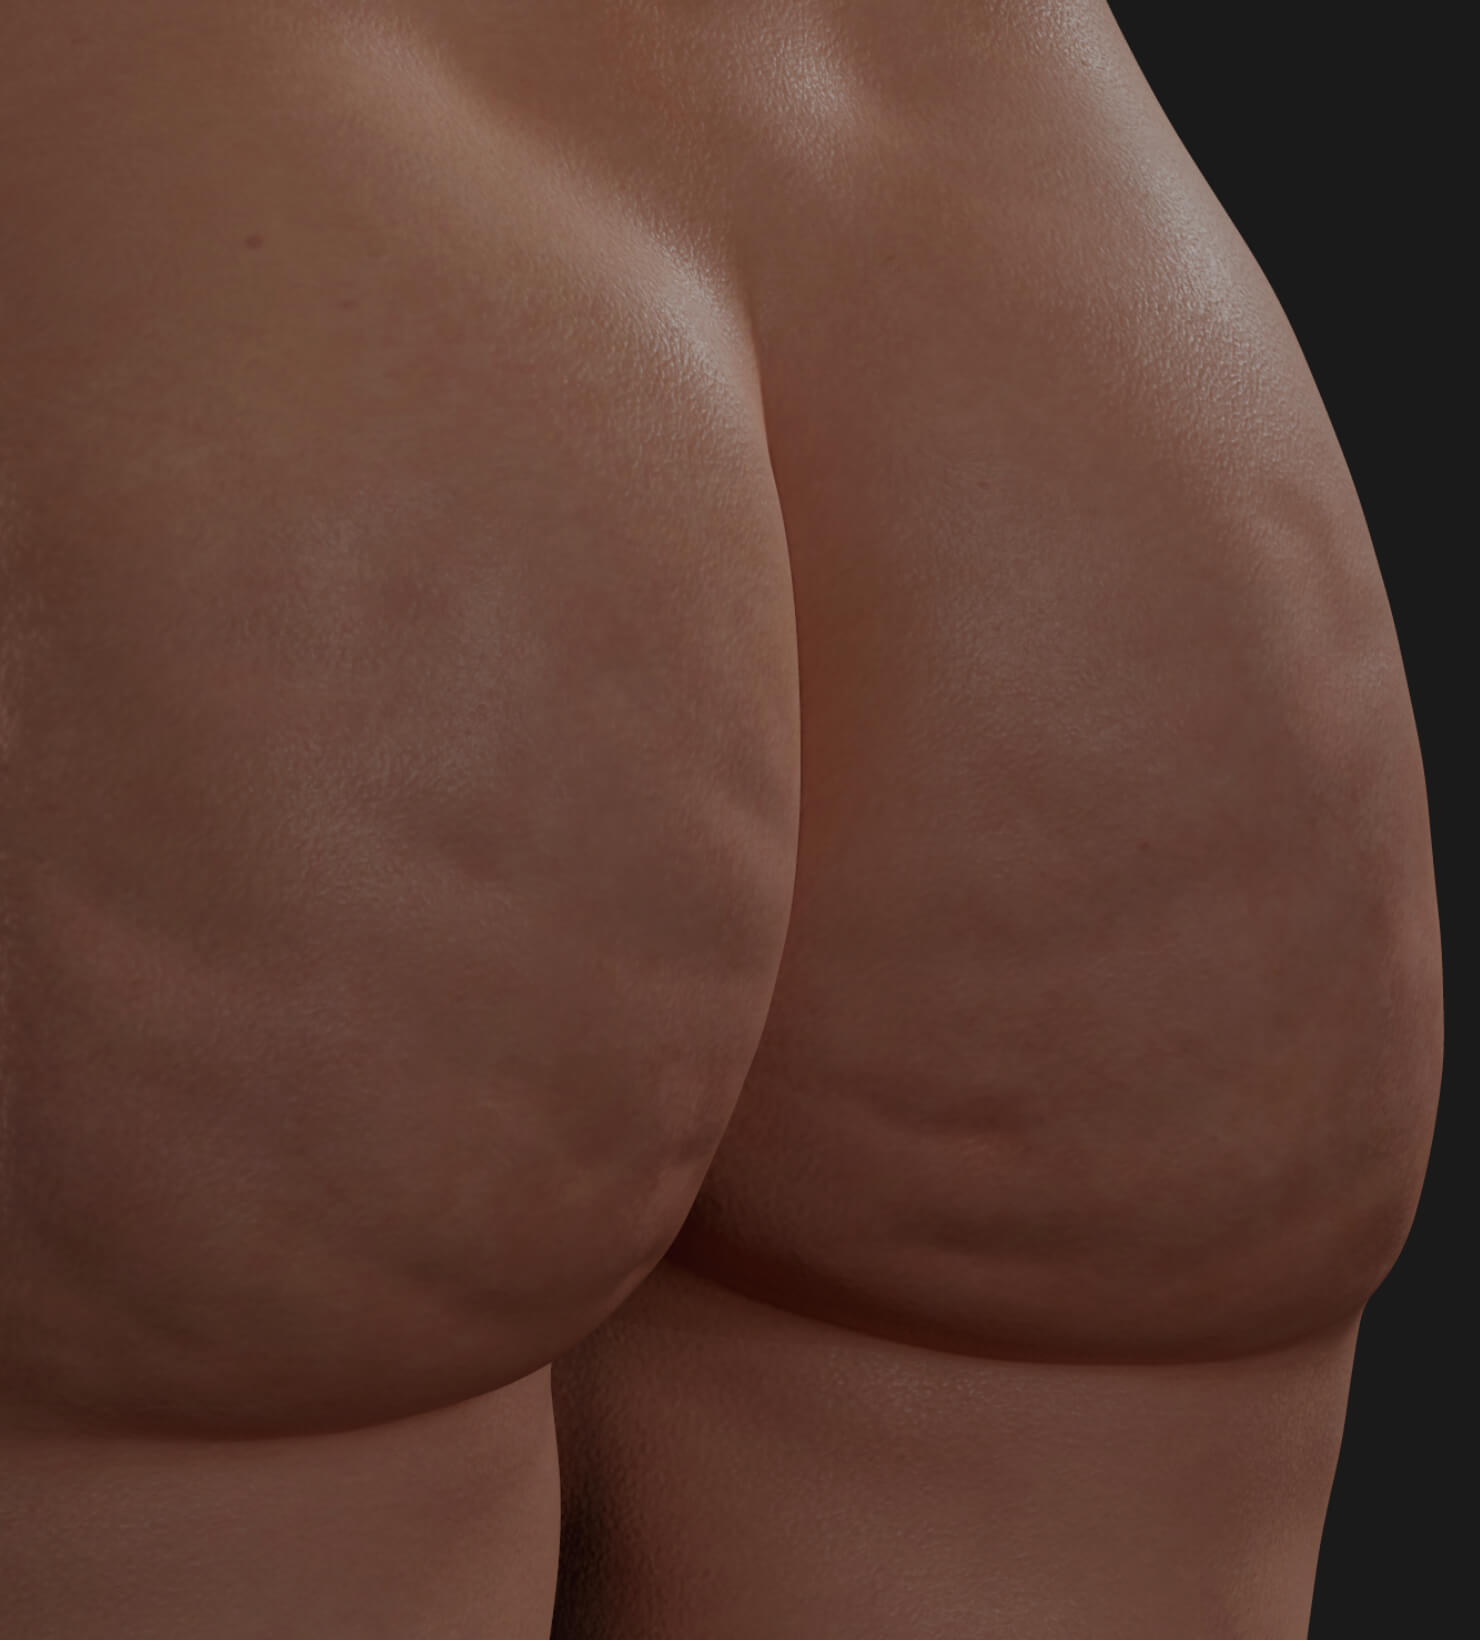 Buttocks of a Clinique Chloé patient showing cellulite, to be treated with Venus Legacy for cellulite reduction